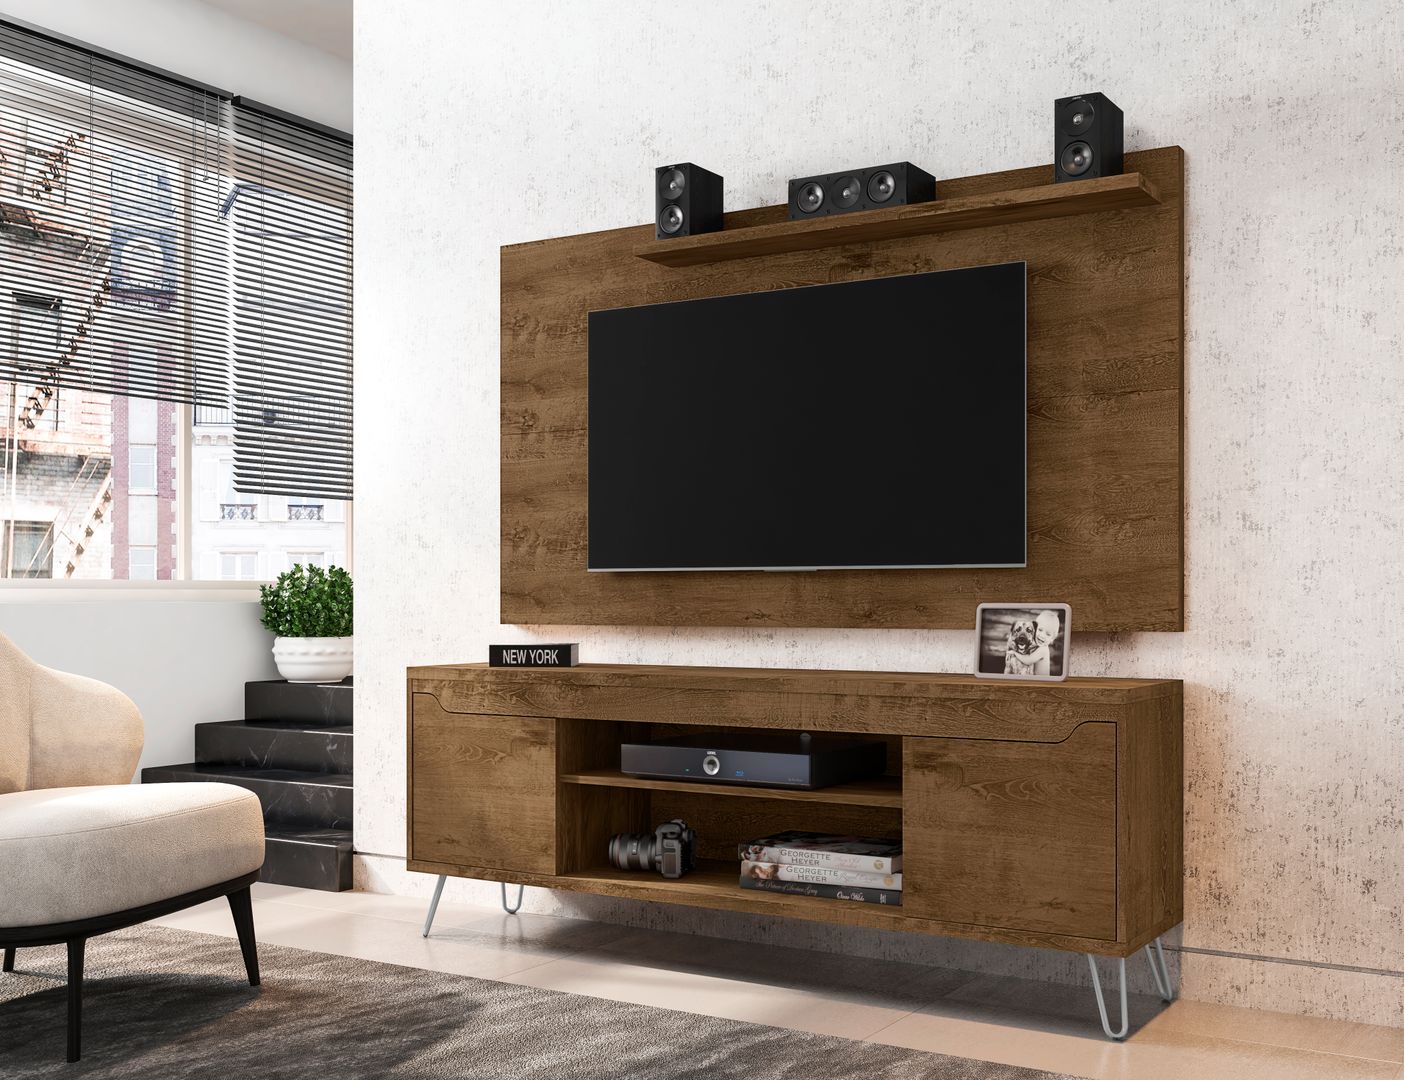 Manhattan Comfort Baxter 62.99 Mid-Century Modern TV Stand and Liberty Panel with Media and Display Shelves in Rustic Brown